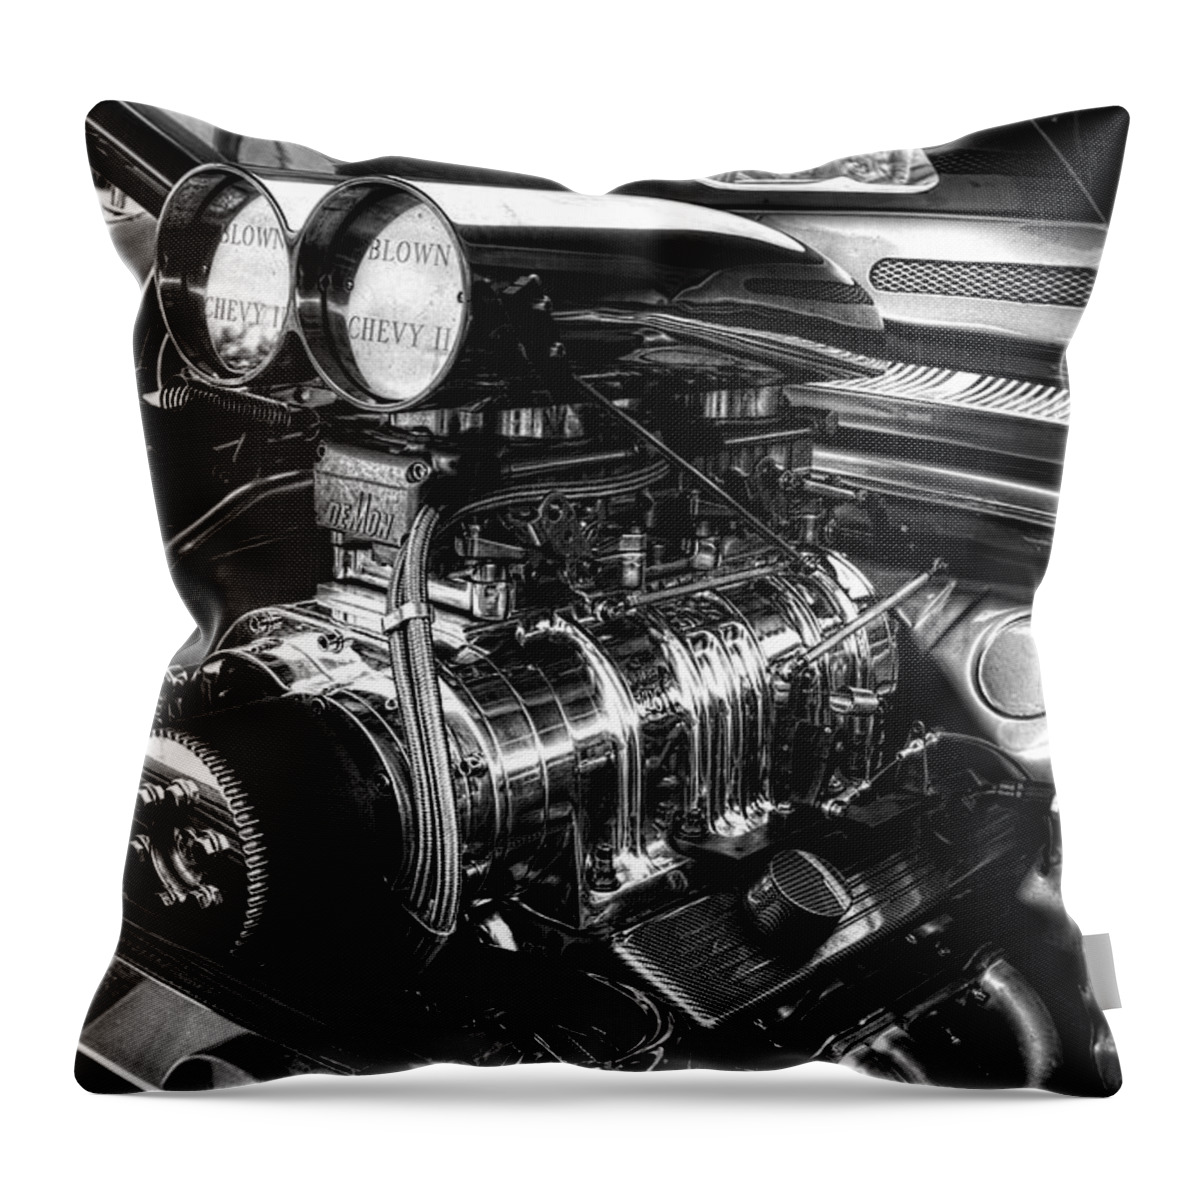 Chevy Blower Motor Throw Pillow featuring the photograph Chevy Supercharger Motor Black and White by Jonathan Davison